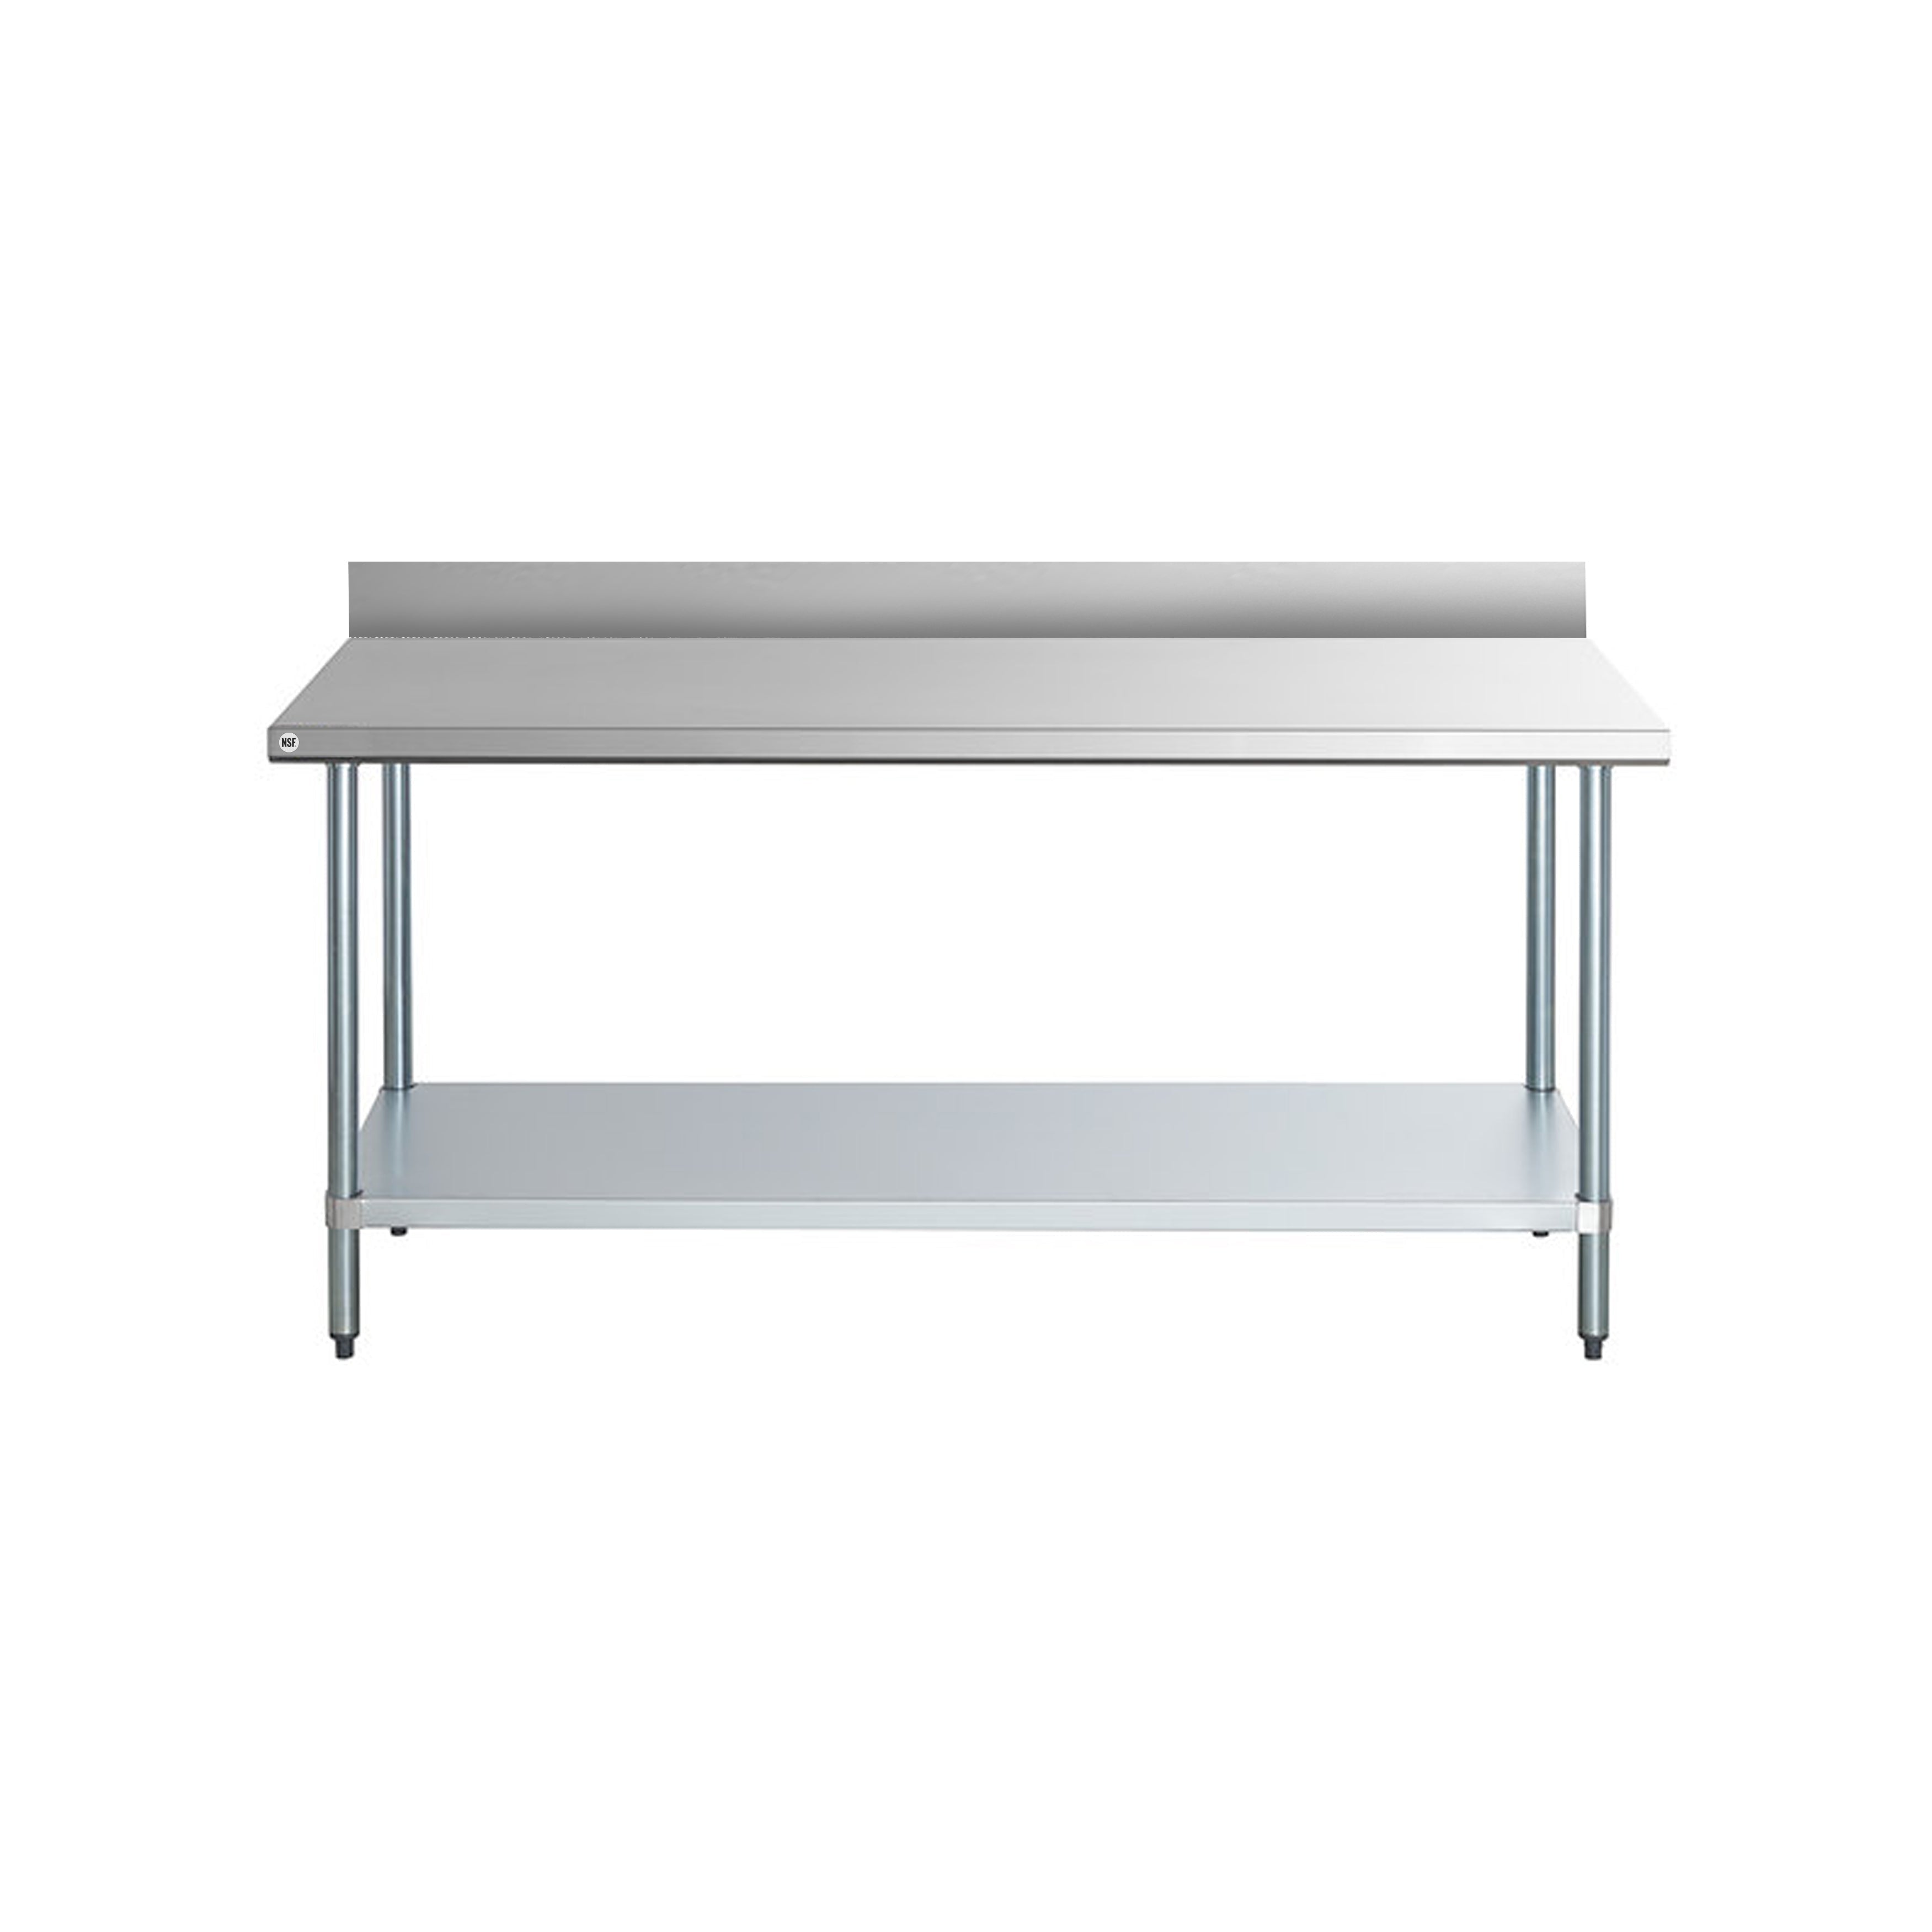 Omcan - 22082, Commercial 24" x 60" Stainless Steel Kitchen Work Table with 4" BackSplash 1100lbs Light Duty